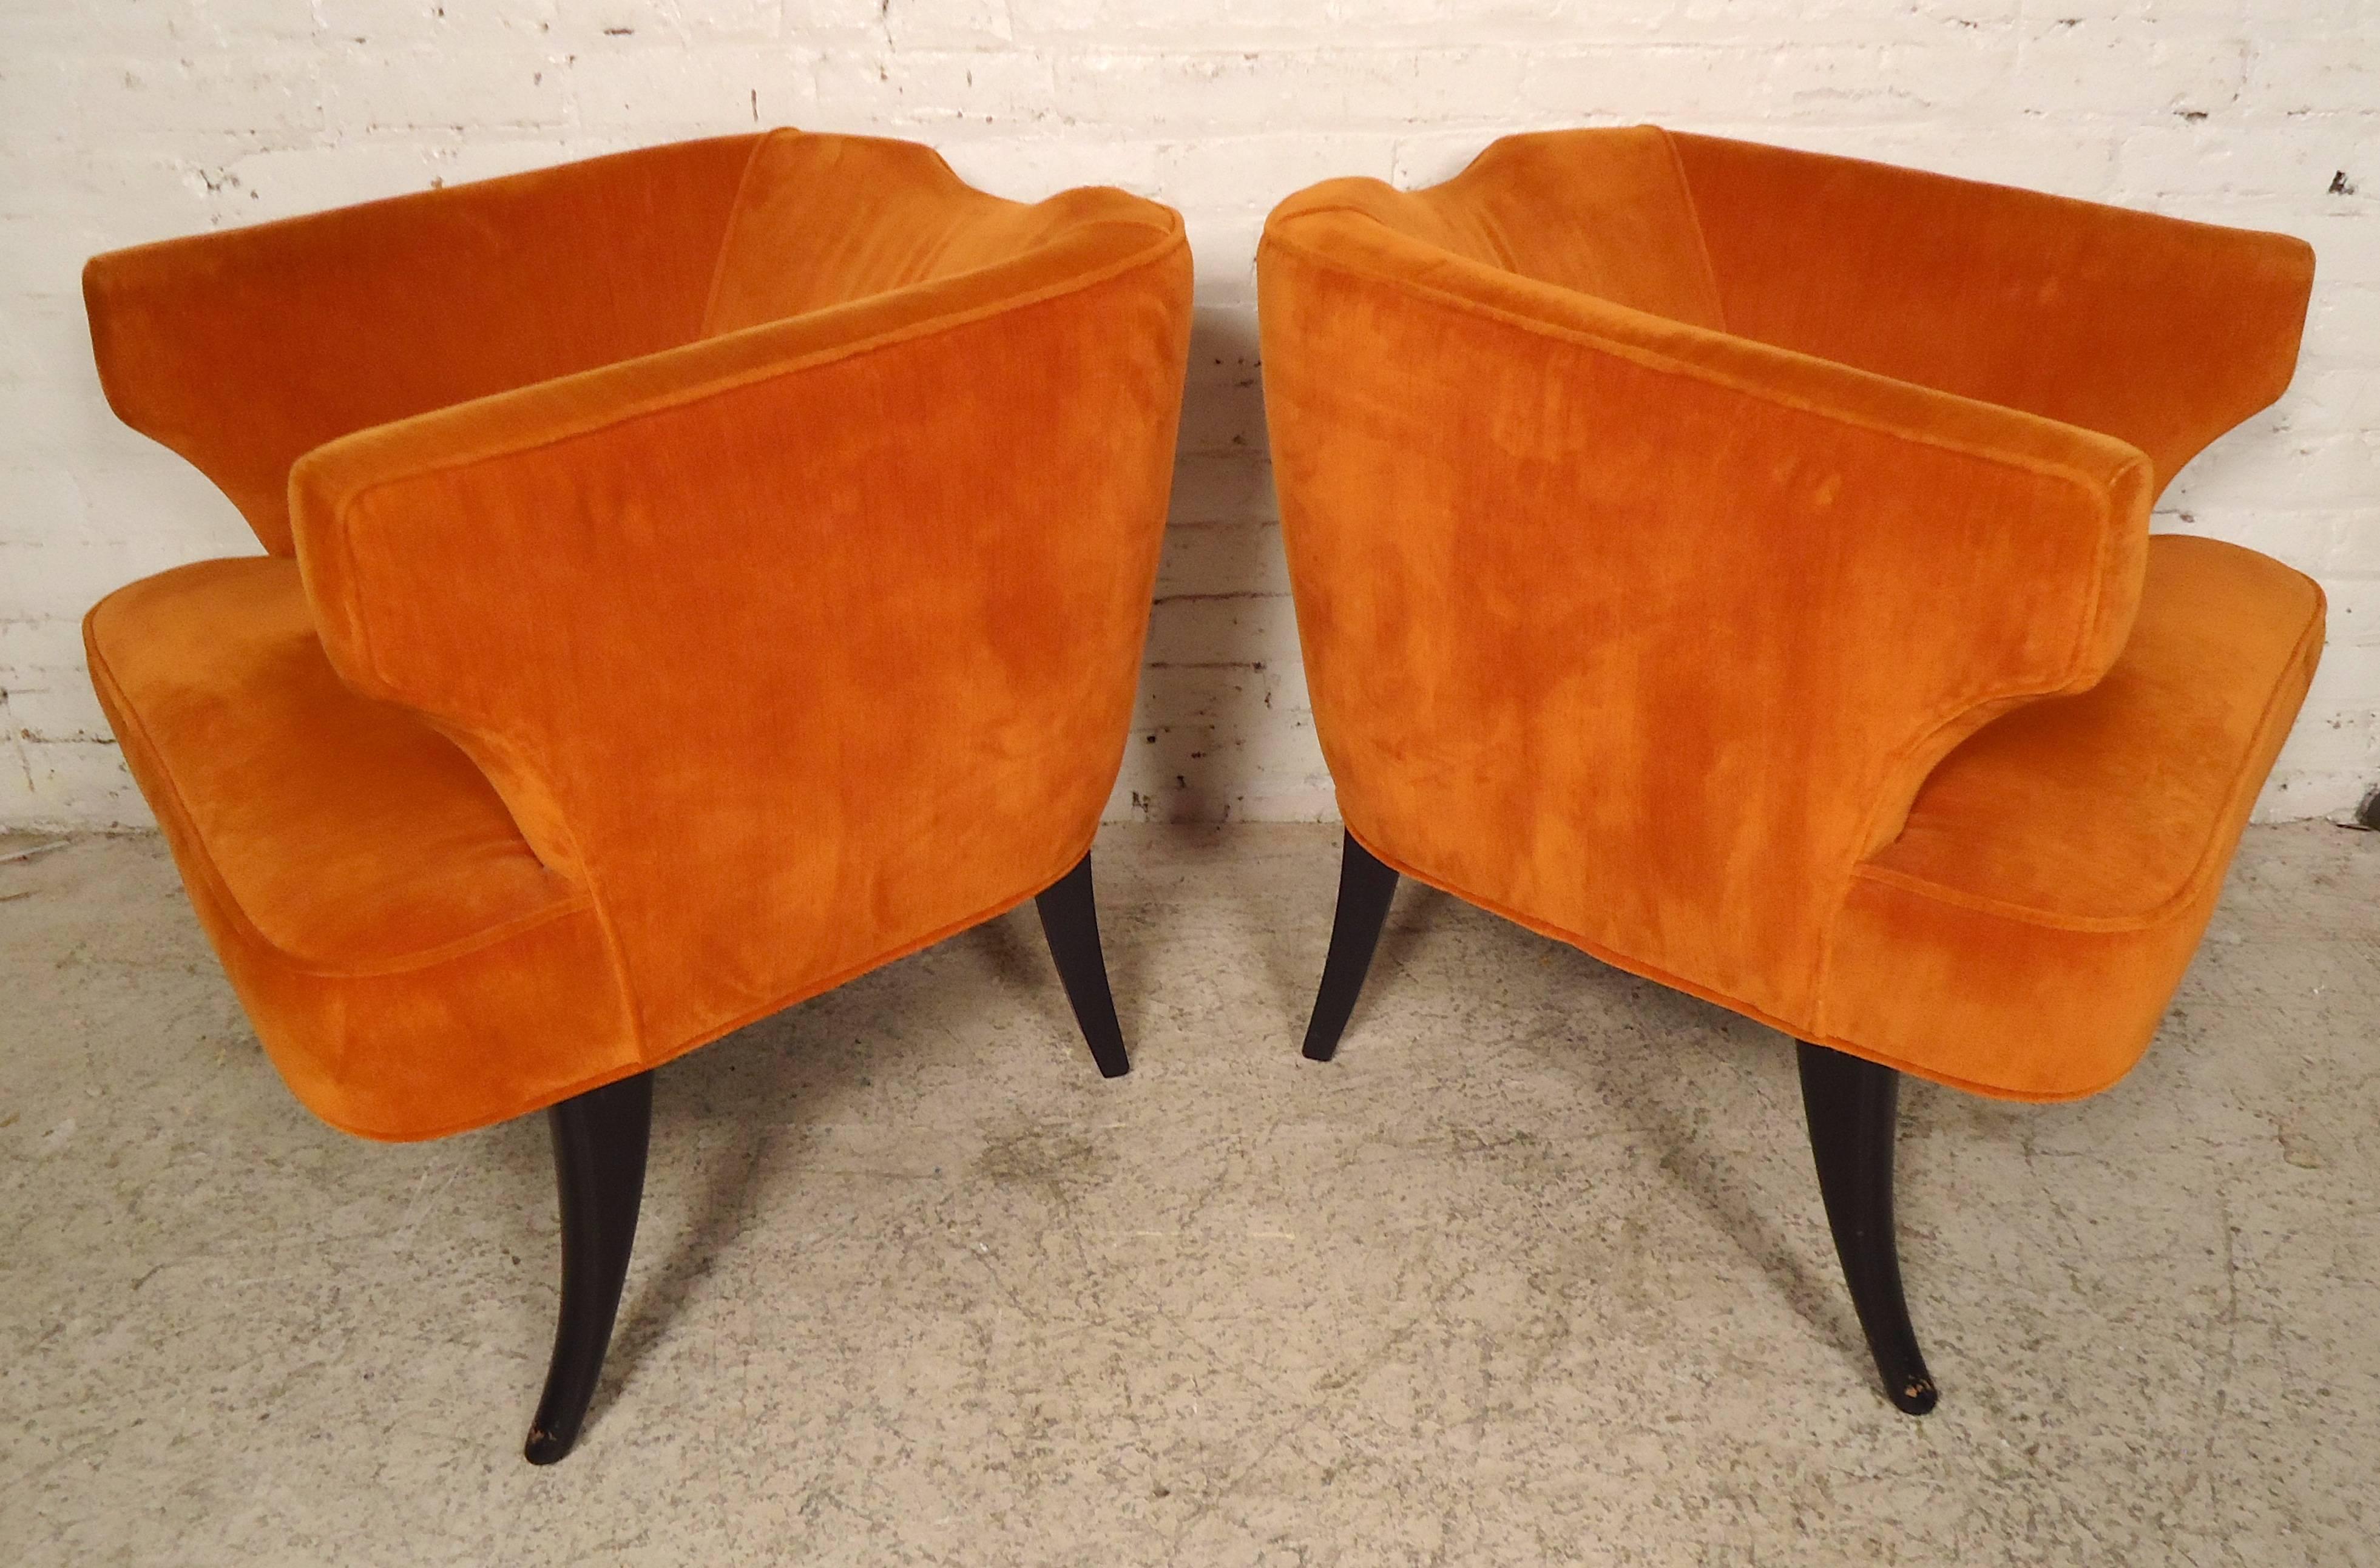 Pair of vintage modern upholstered chairs with unusual rounded back and 